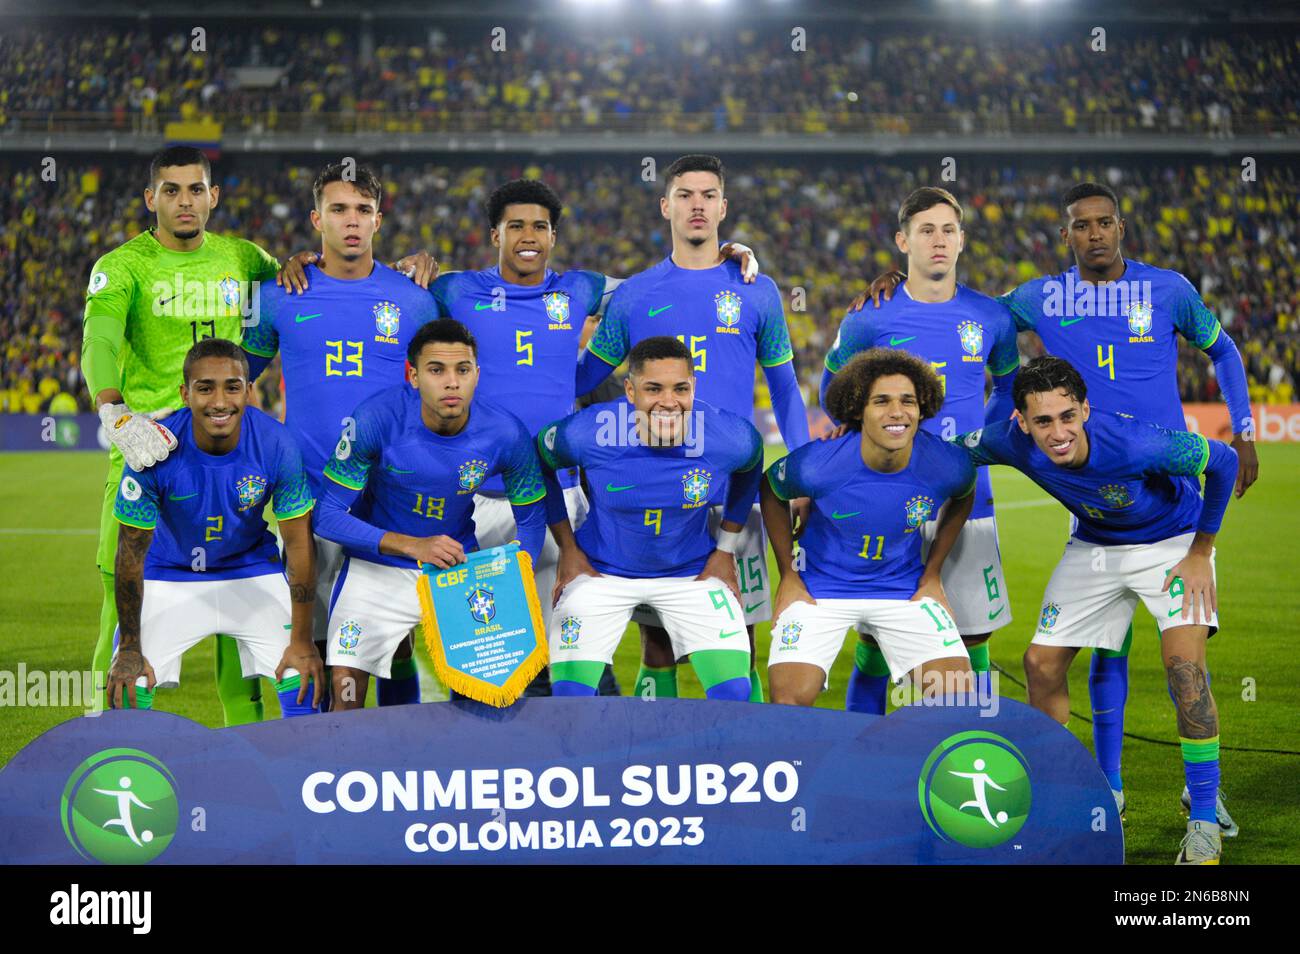 Bogota, Colombia on February 8, 2023. Brazil's U-20 team during the CONMEBOL South American U-20 Colombia tournament match between Colombia and Brazil, in Bogota, Colombia on February 8, 2023. Photo by: Chepa Beltran/Long Visual Press Stock Photo